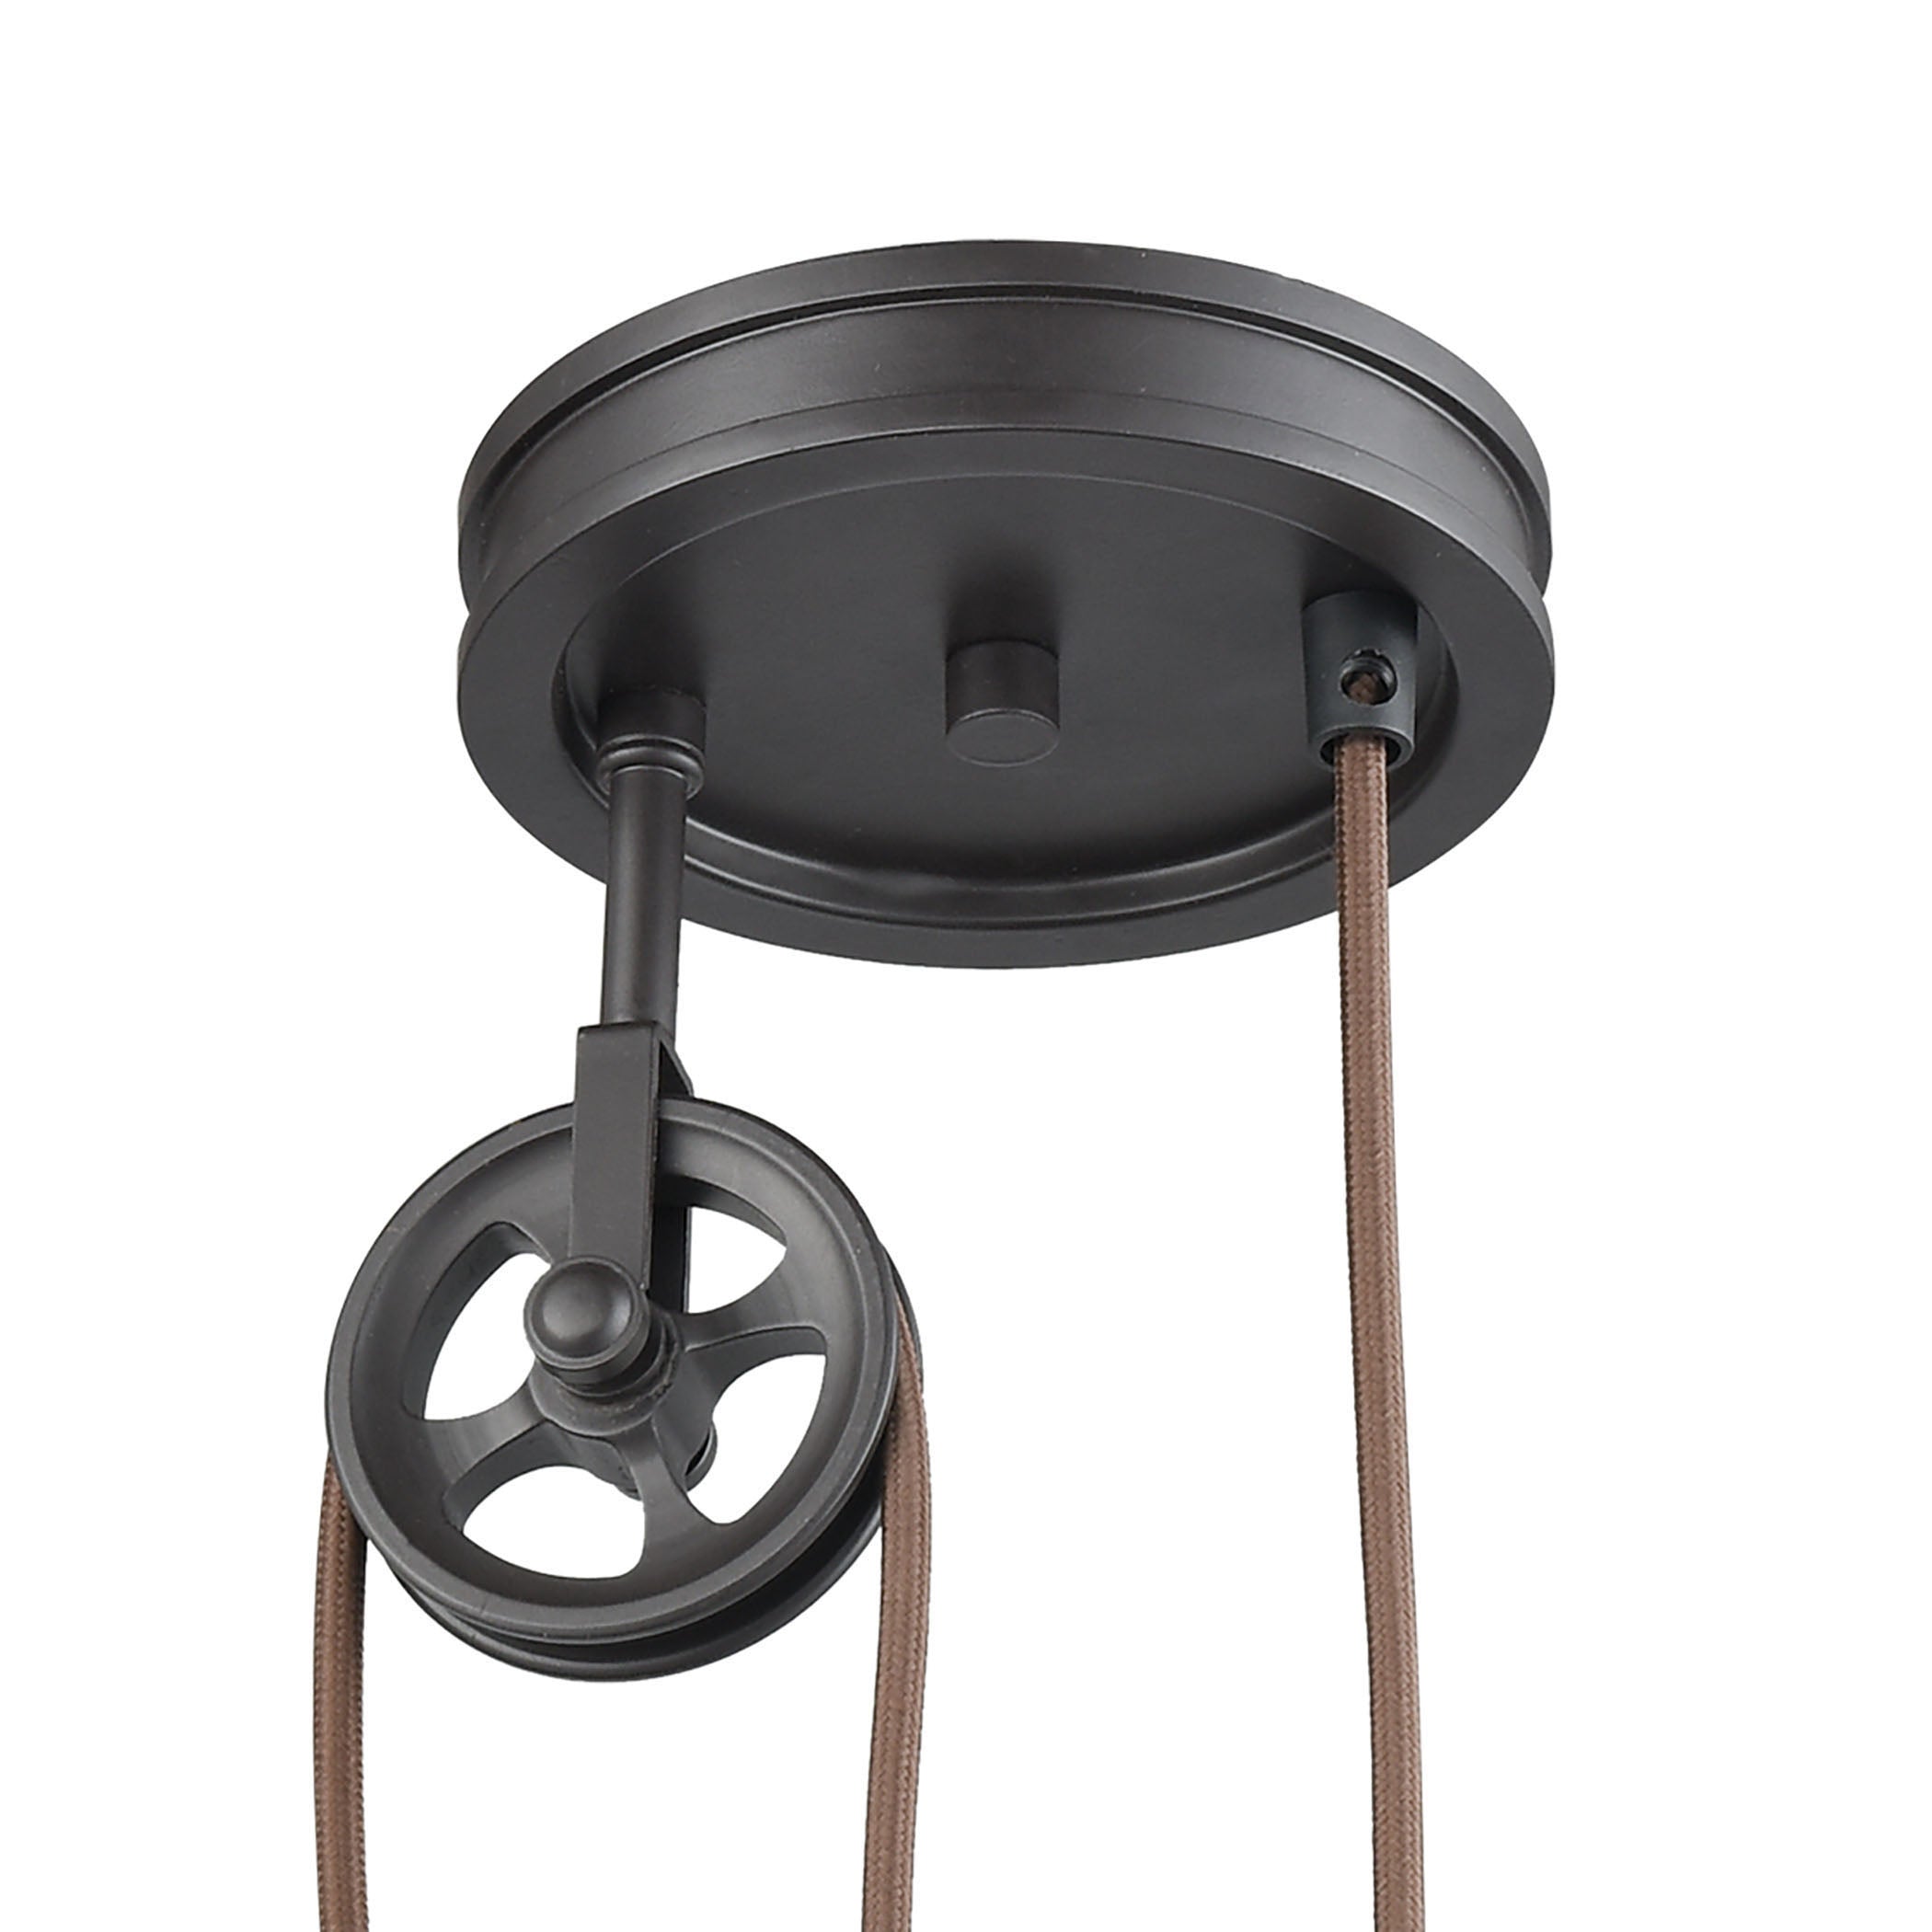 ELK Lighting 69083/1 Spindle Wheel 1-Light Adjustable Pendant in Oil Rubbed Bronze with Matching Shade